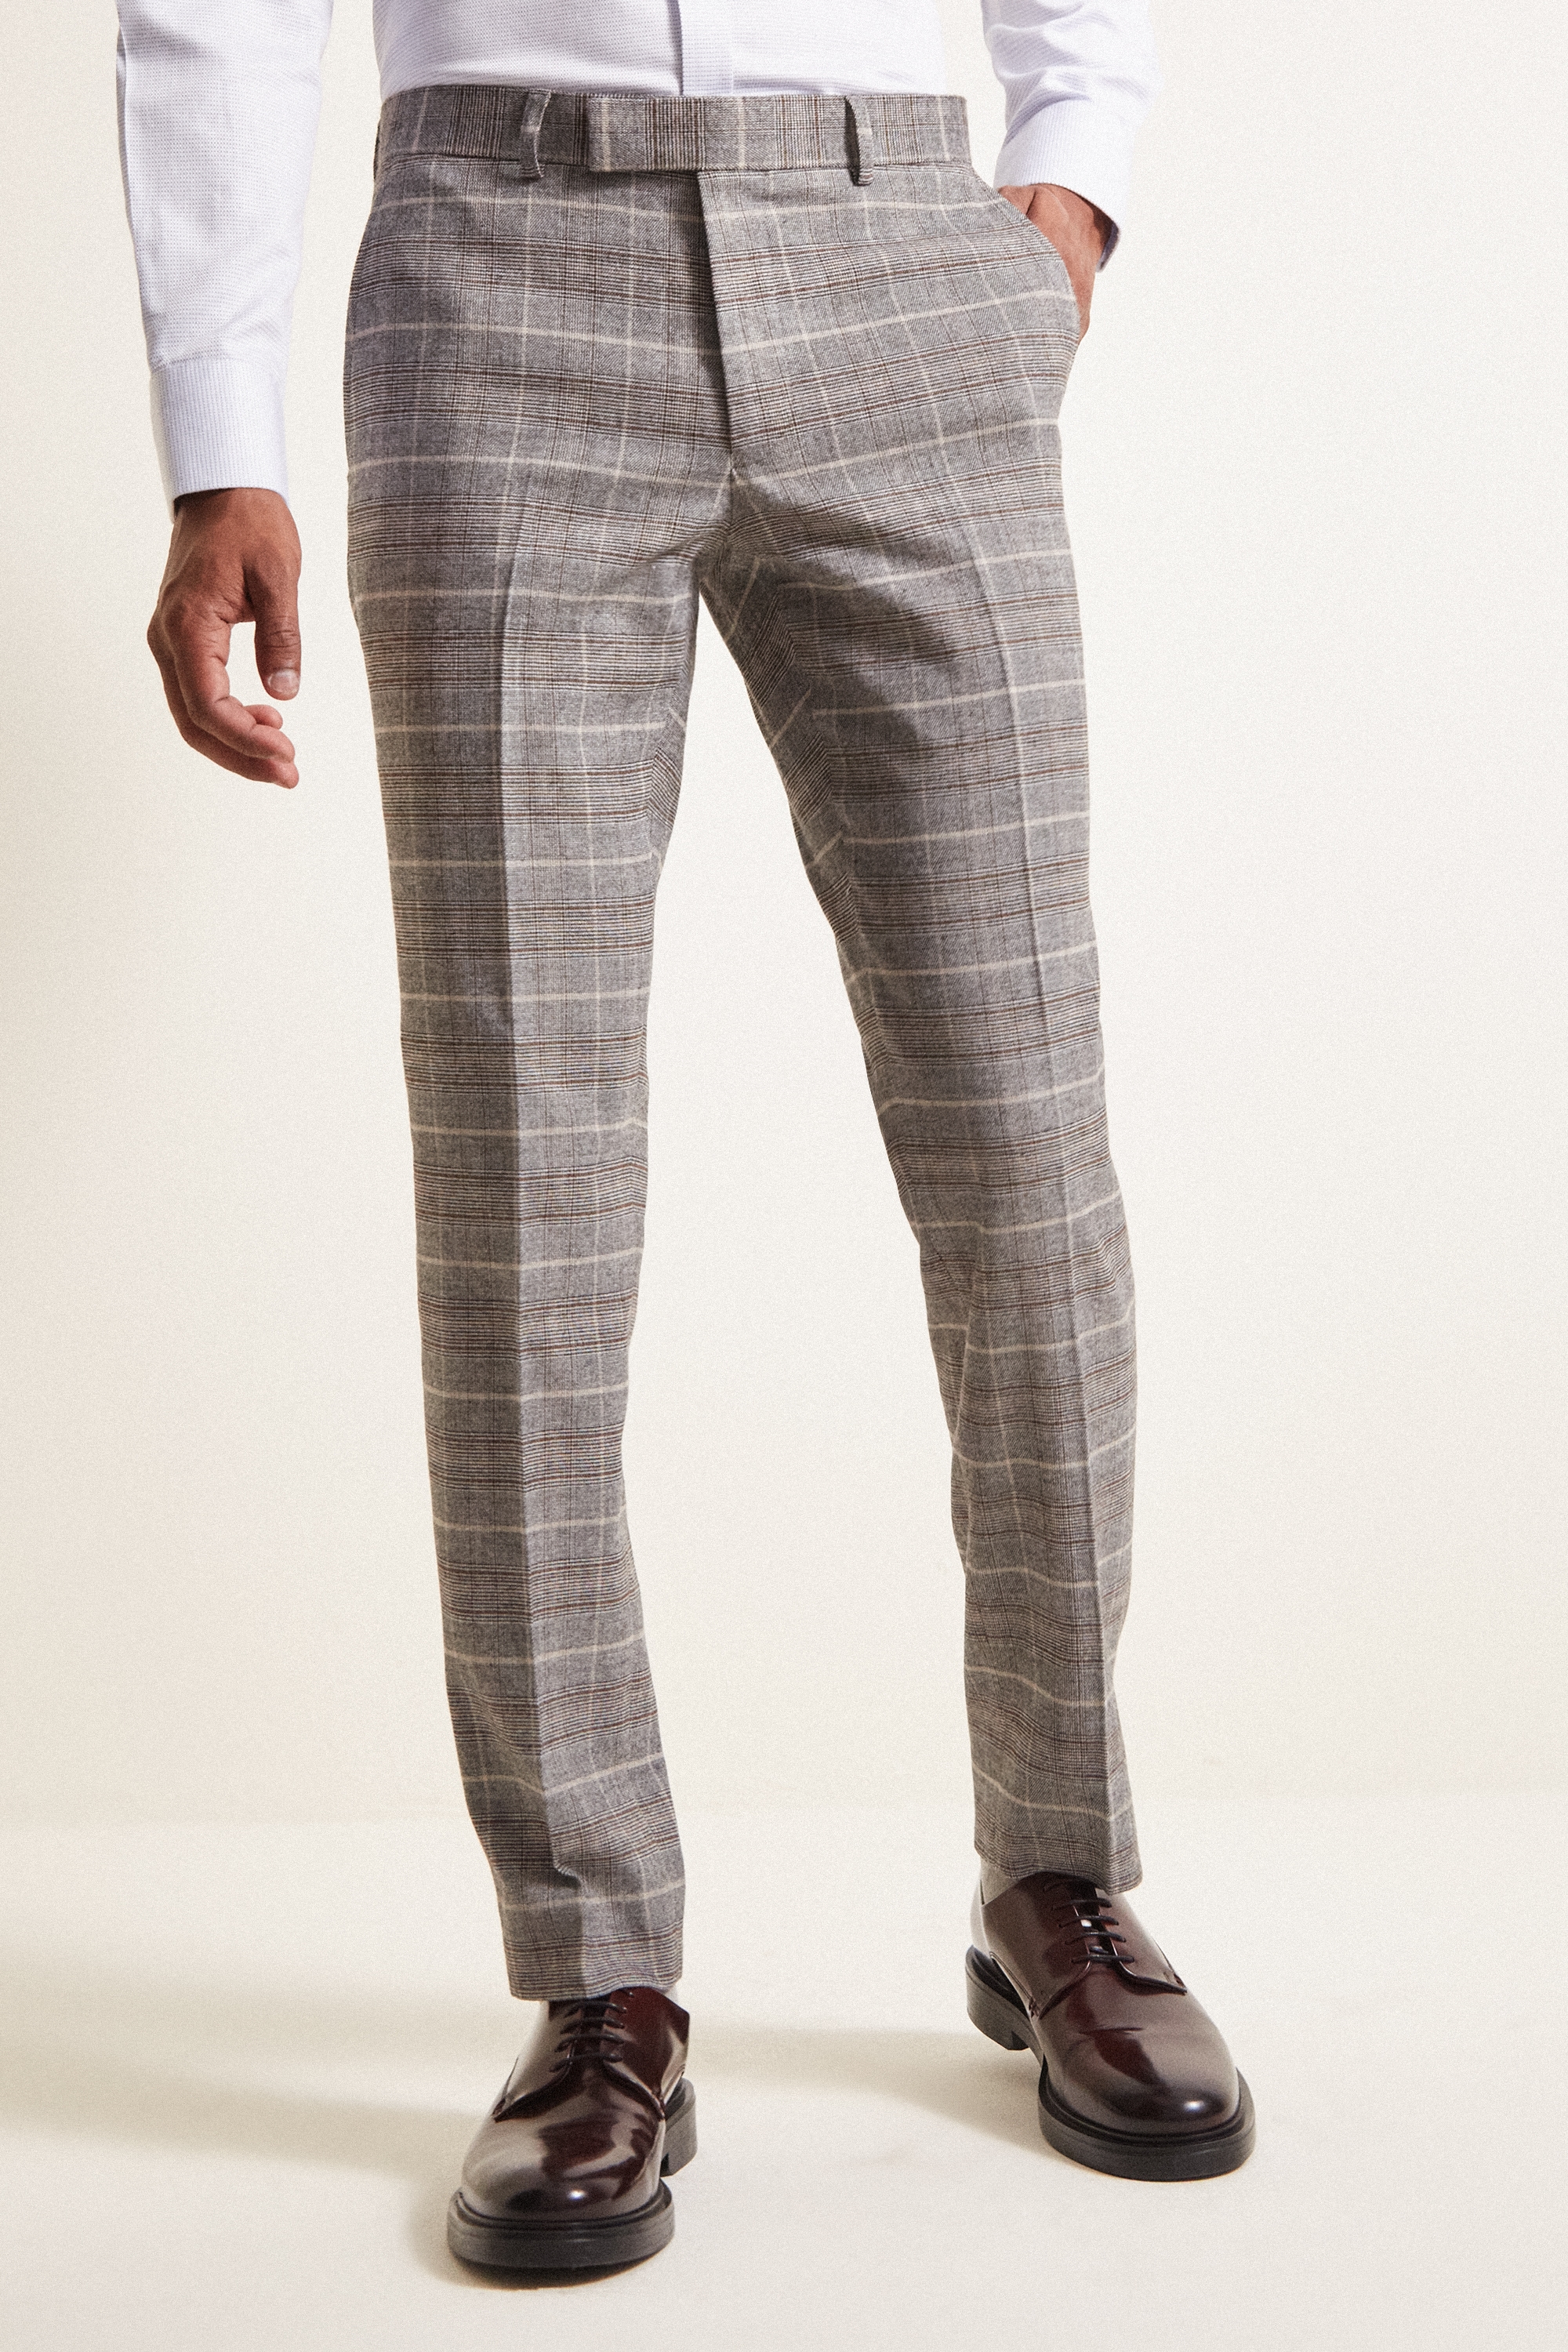 Slim Fit Grey Tan Check Trousers | Buy Online at Moss